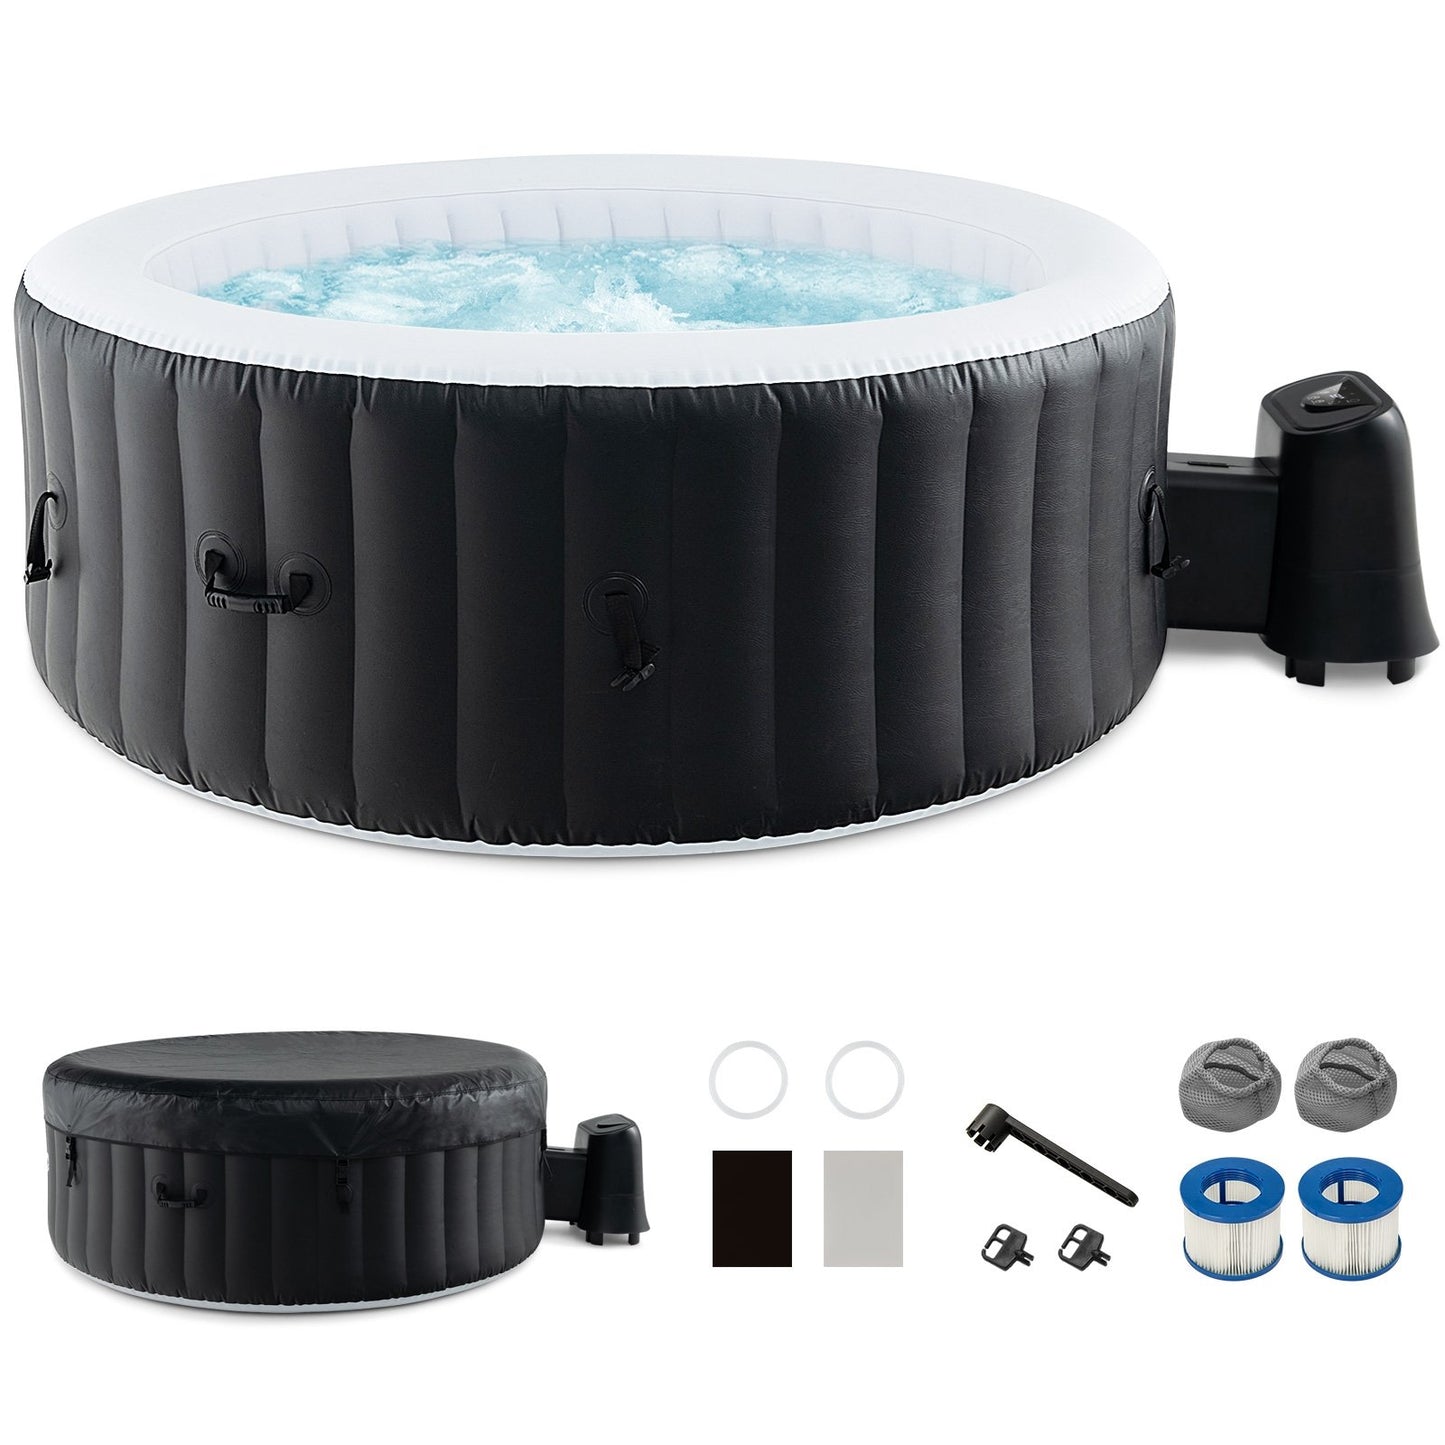 70/80 Inches Round SPA Pool Hottub with 110/130 Air Jets Electric Heater Pump-S, Black